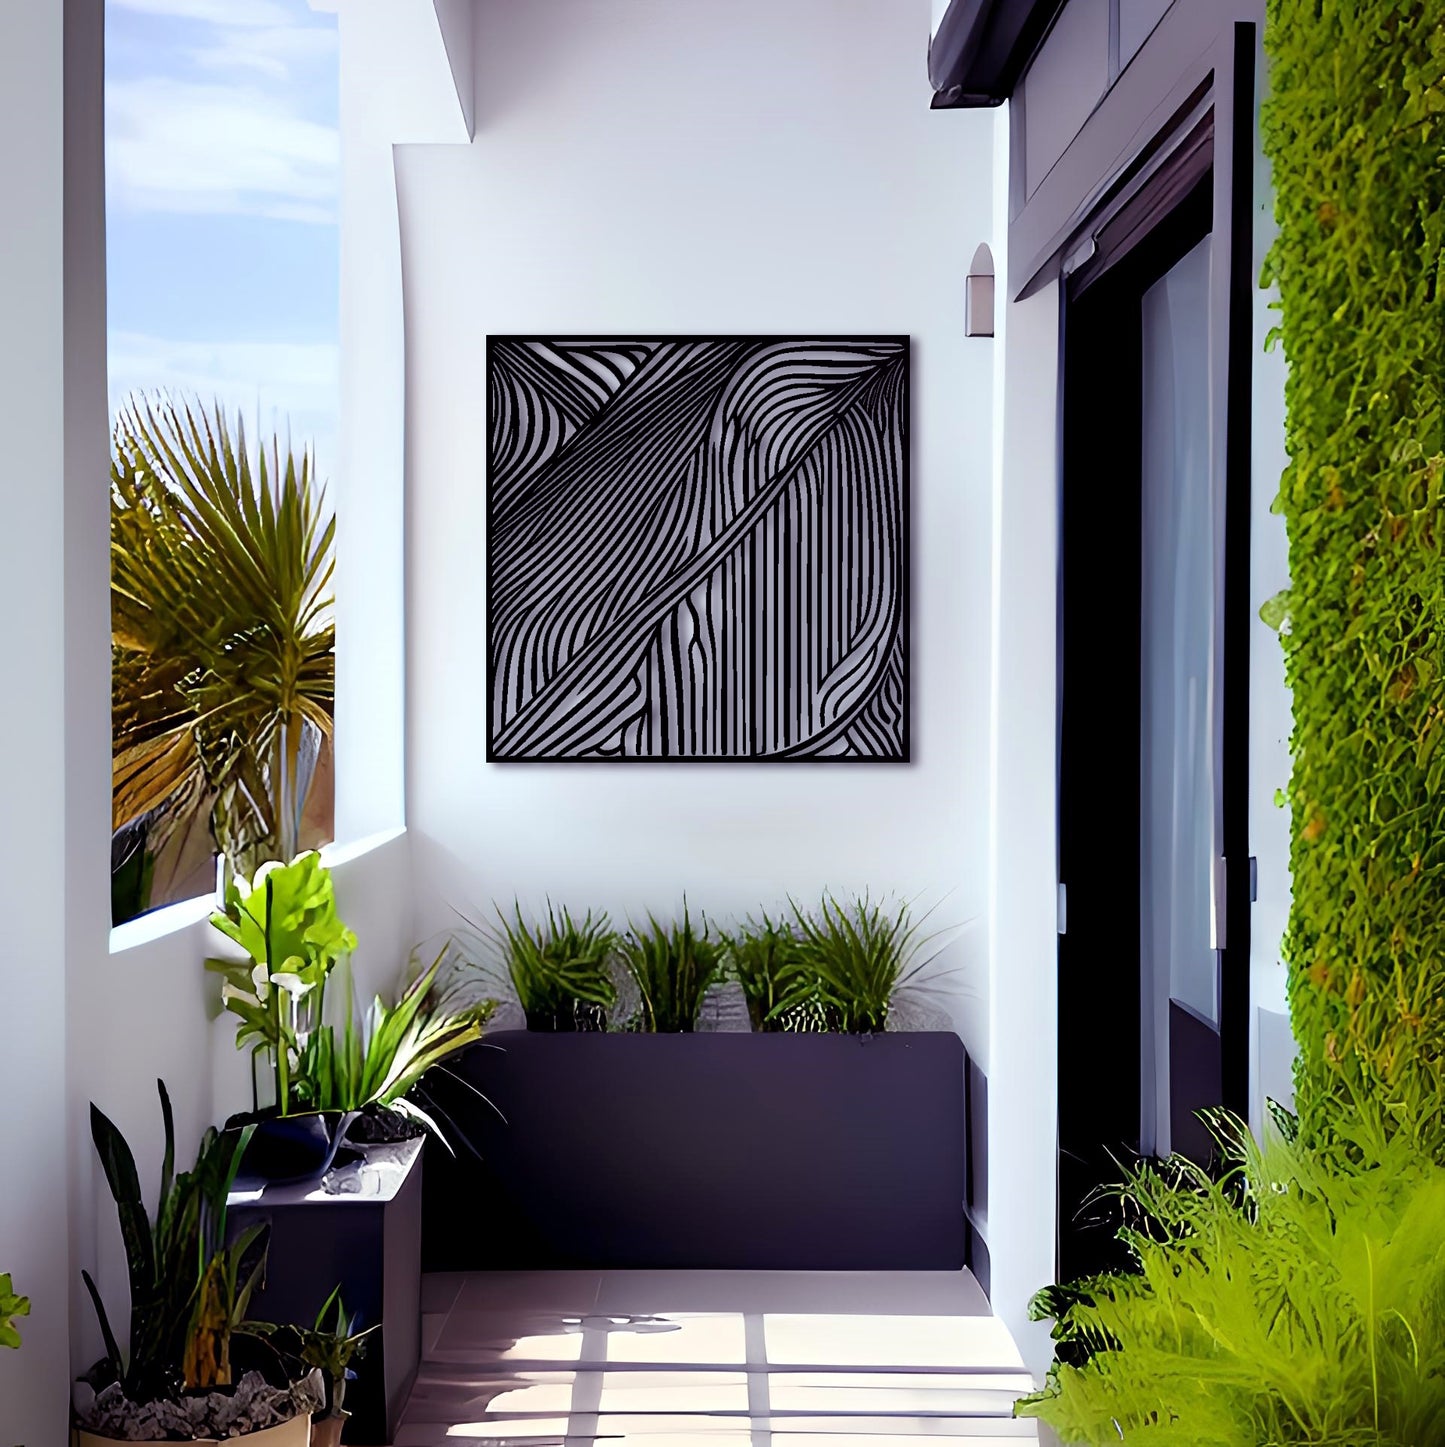 Contrasting Stripes - Abstract Metal Wall Art Inspired by Victor Vasarely